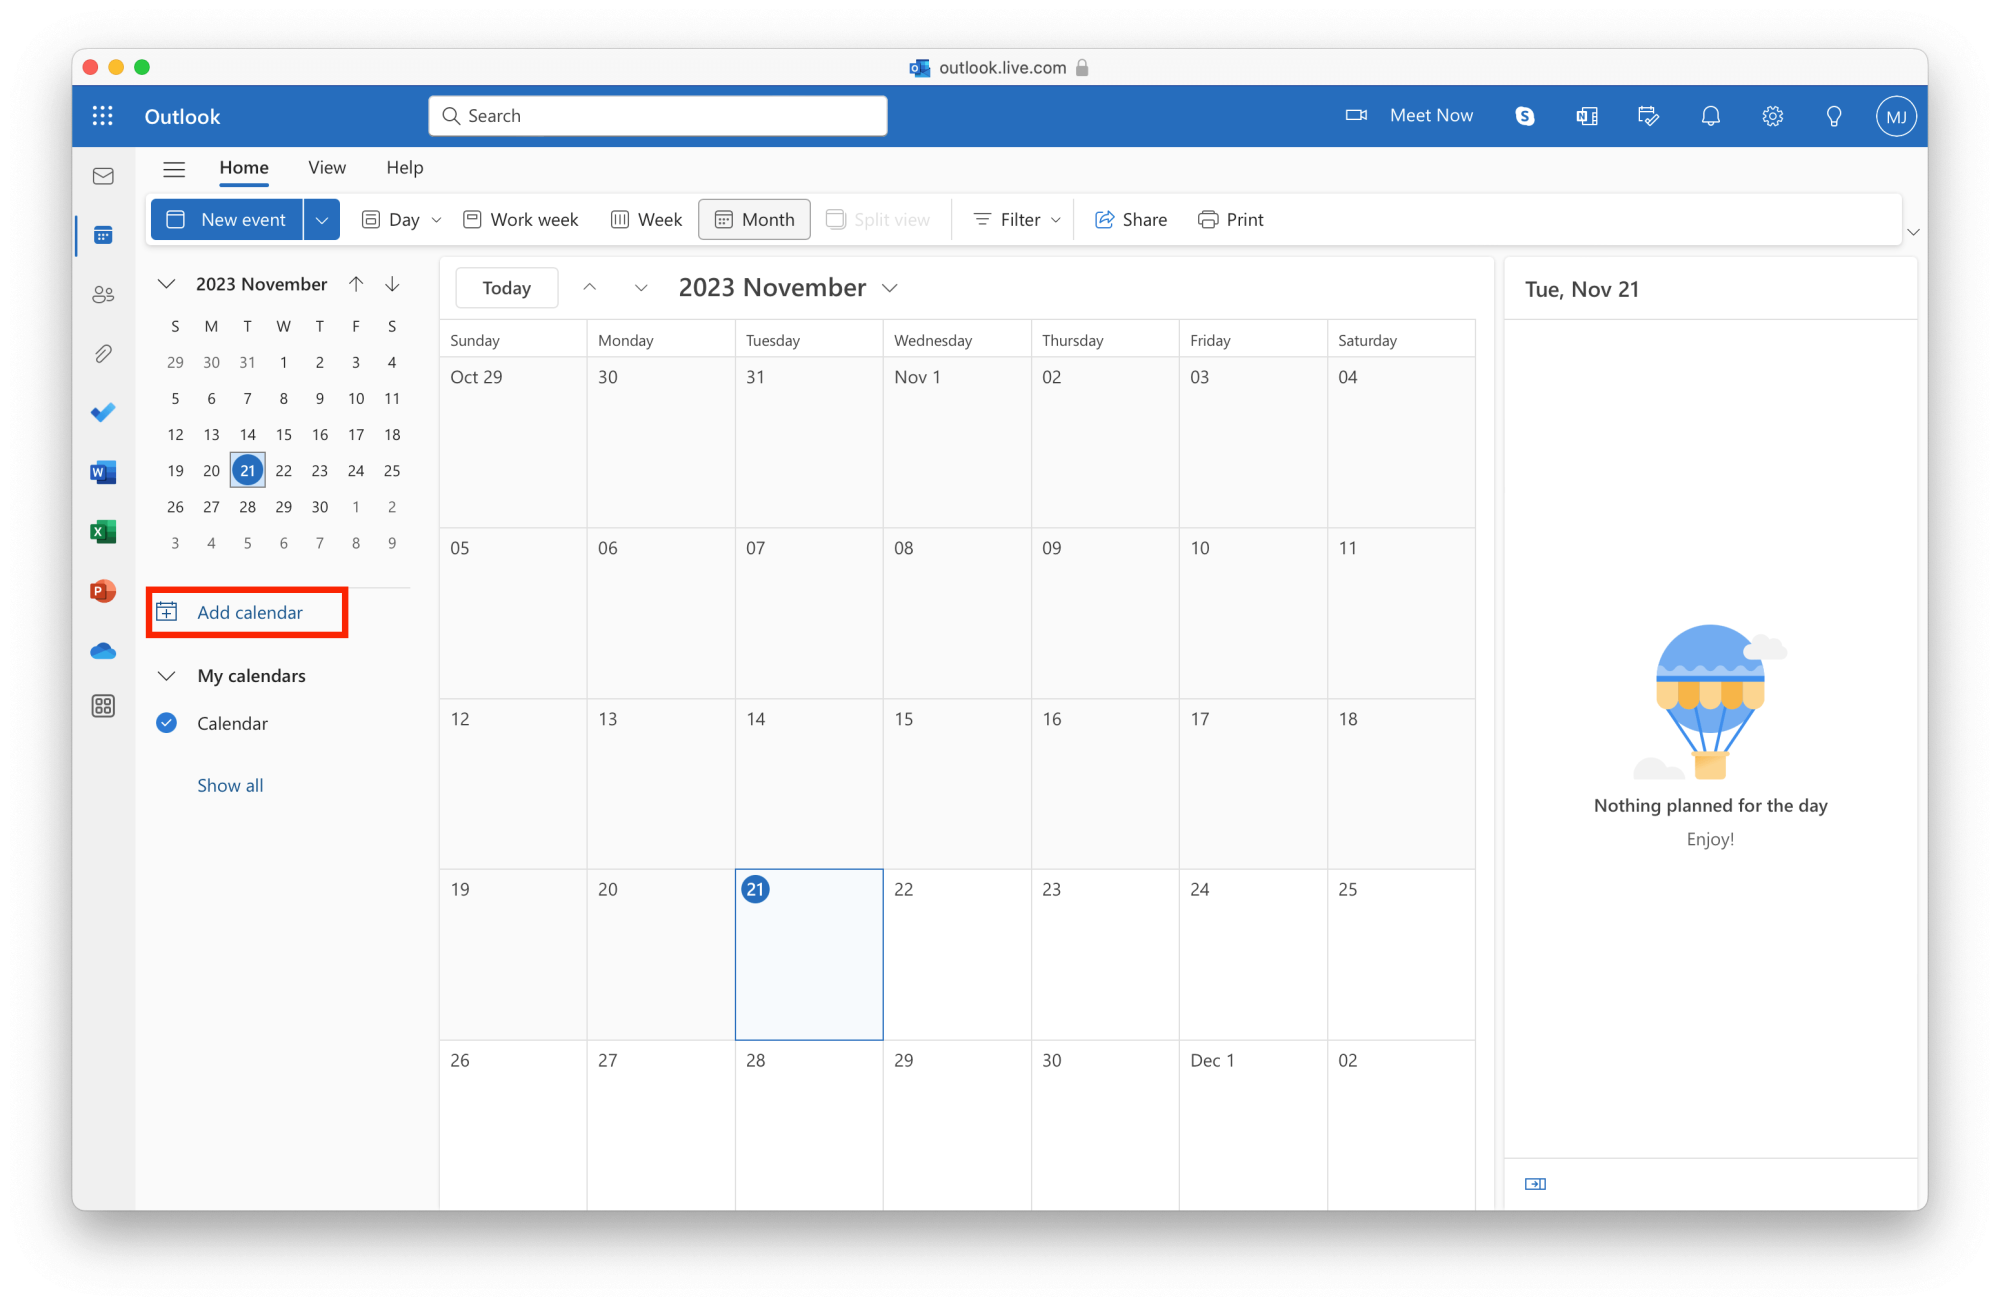 Migrate G Suite to Office 365: Import calendar to Office 365 – Step 01